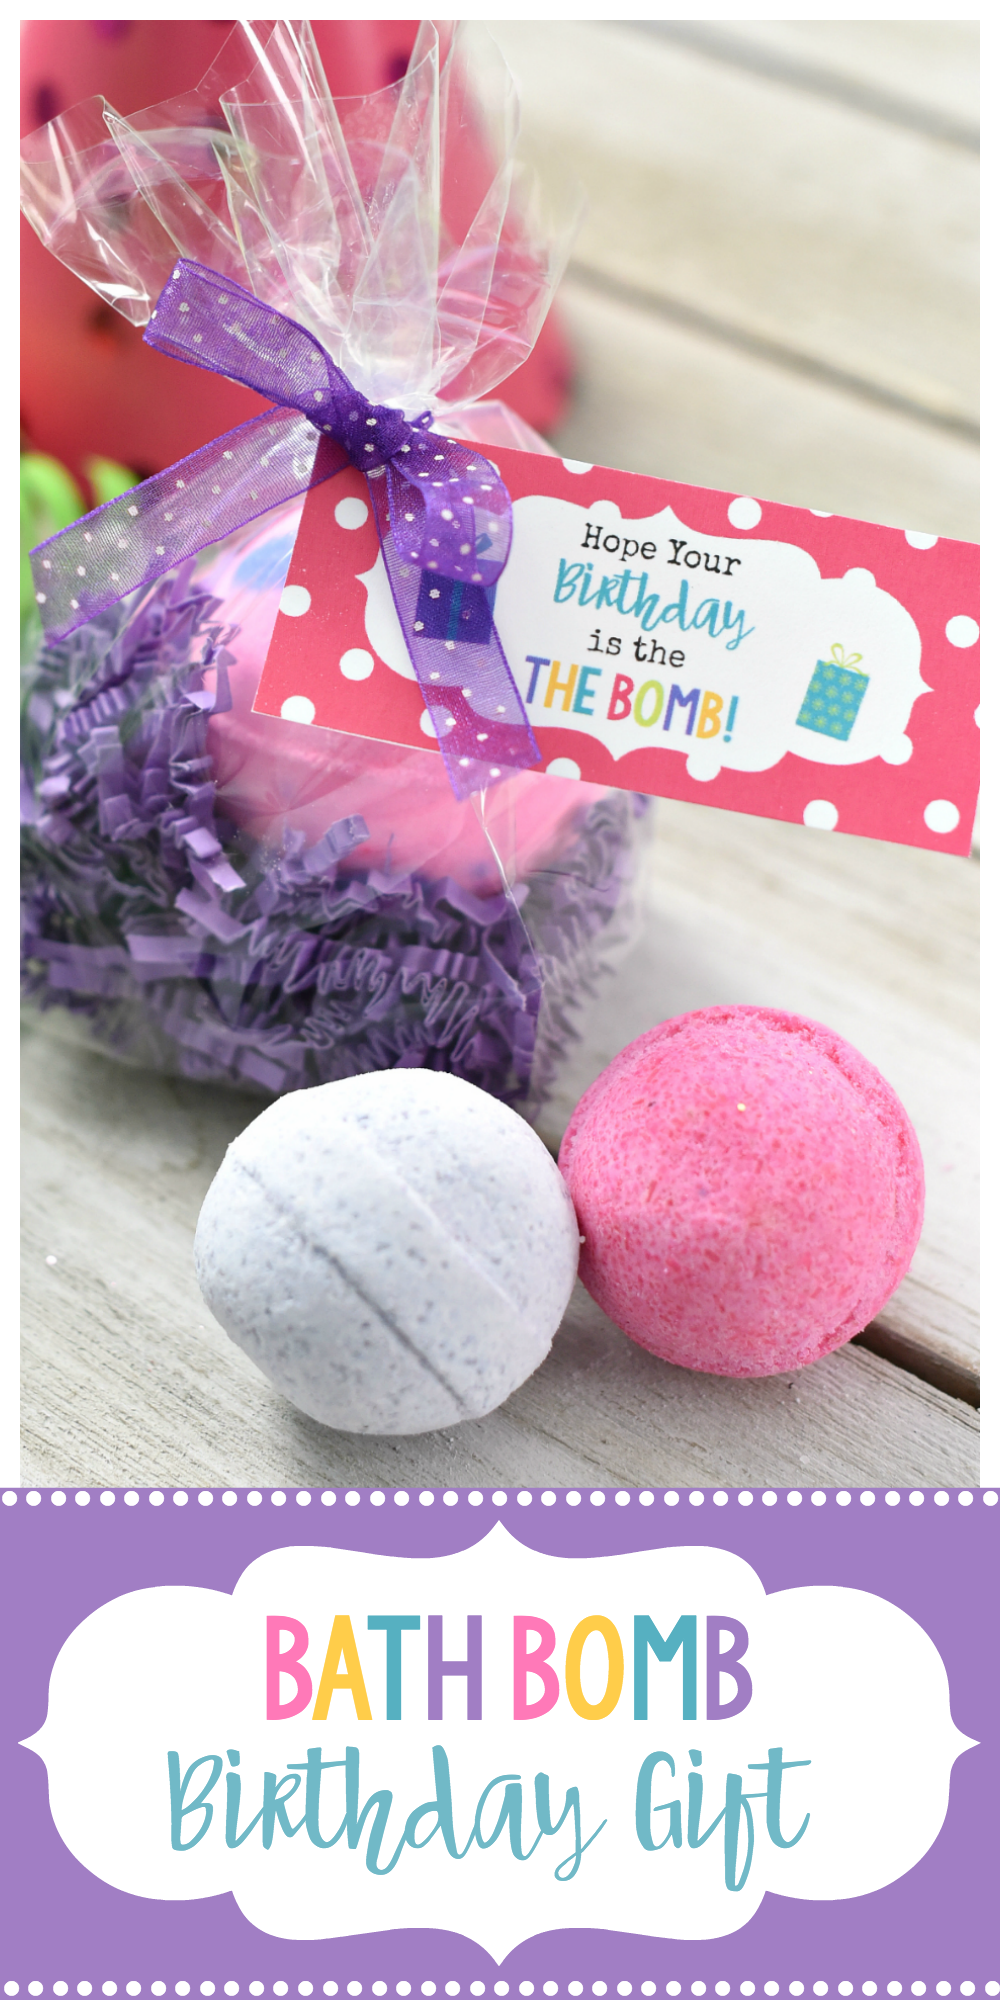 Cute Bath Bomb Birthday Gift-This simple spa gift is a perfect birthday gift idea for friends. A creative birthday gift that they will love. #birthdaygift #birthdaygifts #creativegifts #bathbombs #bathgifts